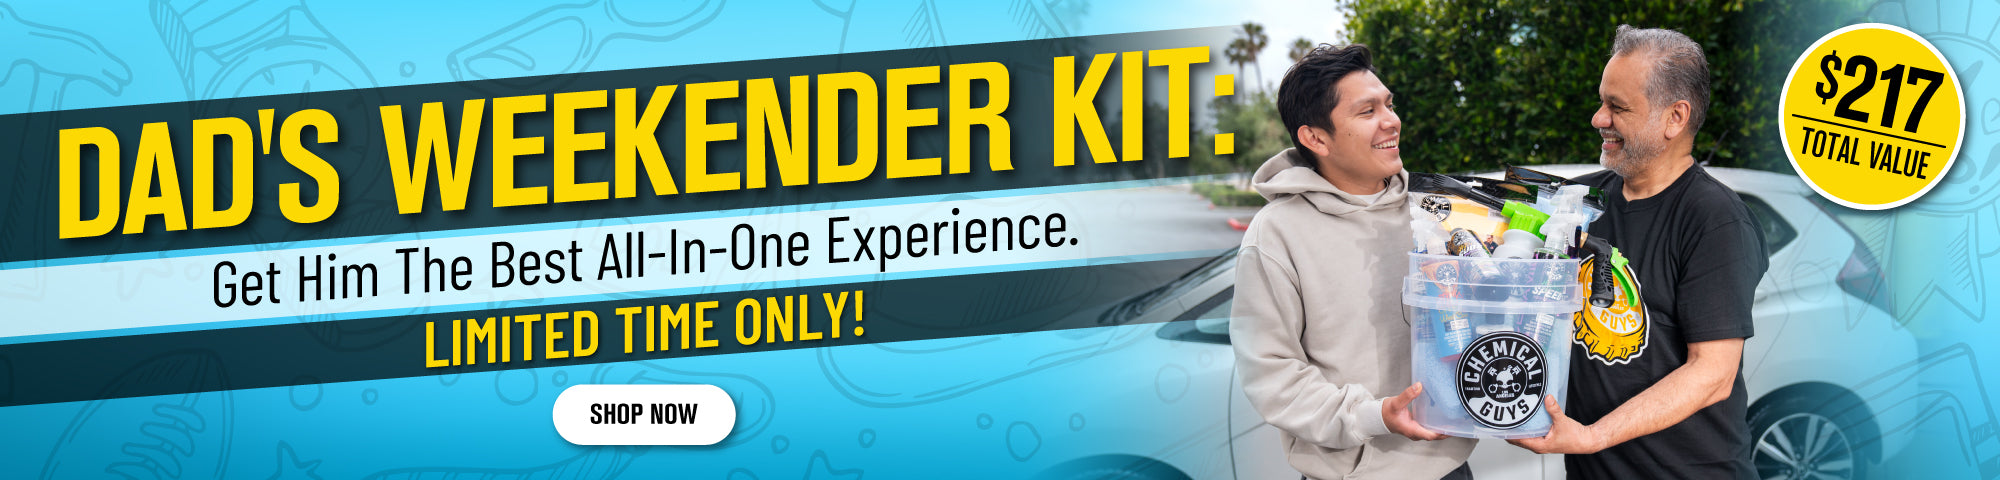 Dad's Weekender Kit: Get Him The Best All-In-One Experience. Limited Time Only!